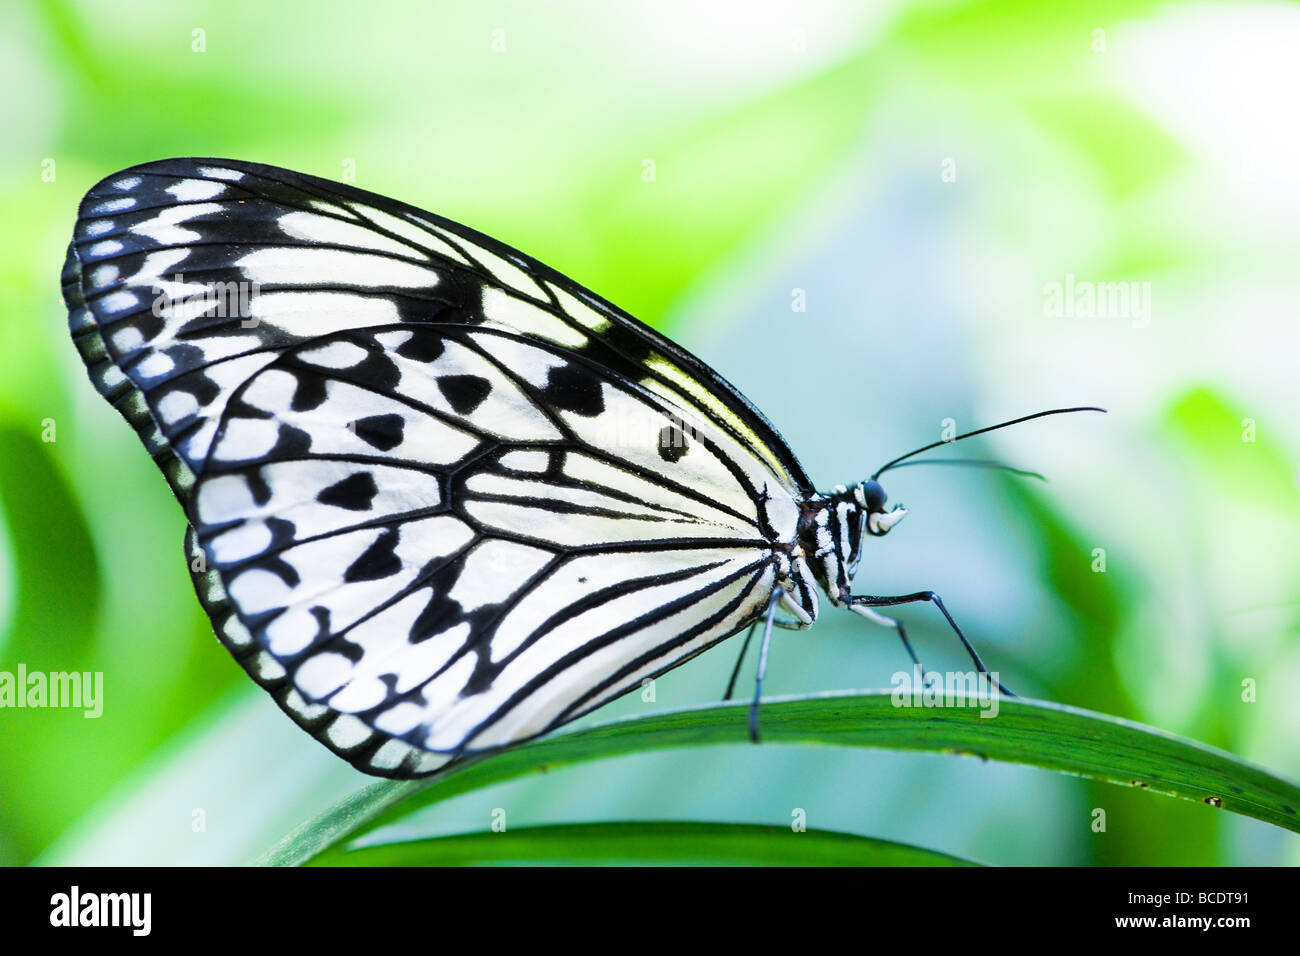 white tree nymph butterfly (lat idea leuconoe) with green out of focus background Stock Photo